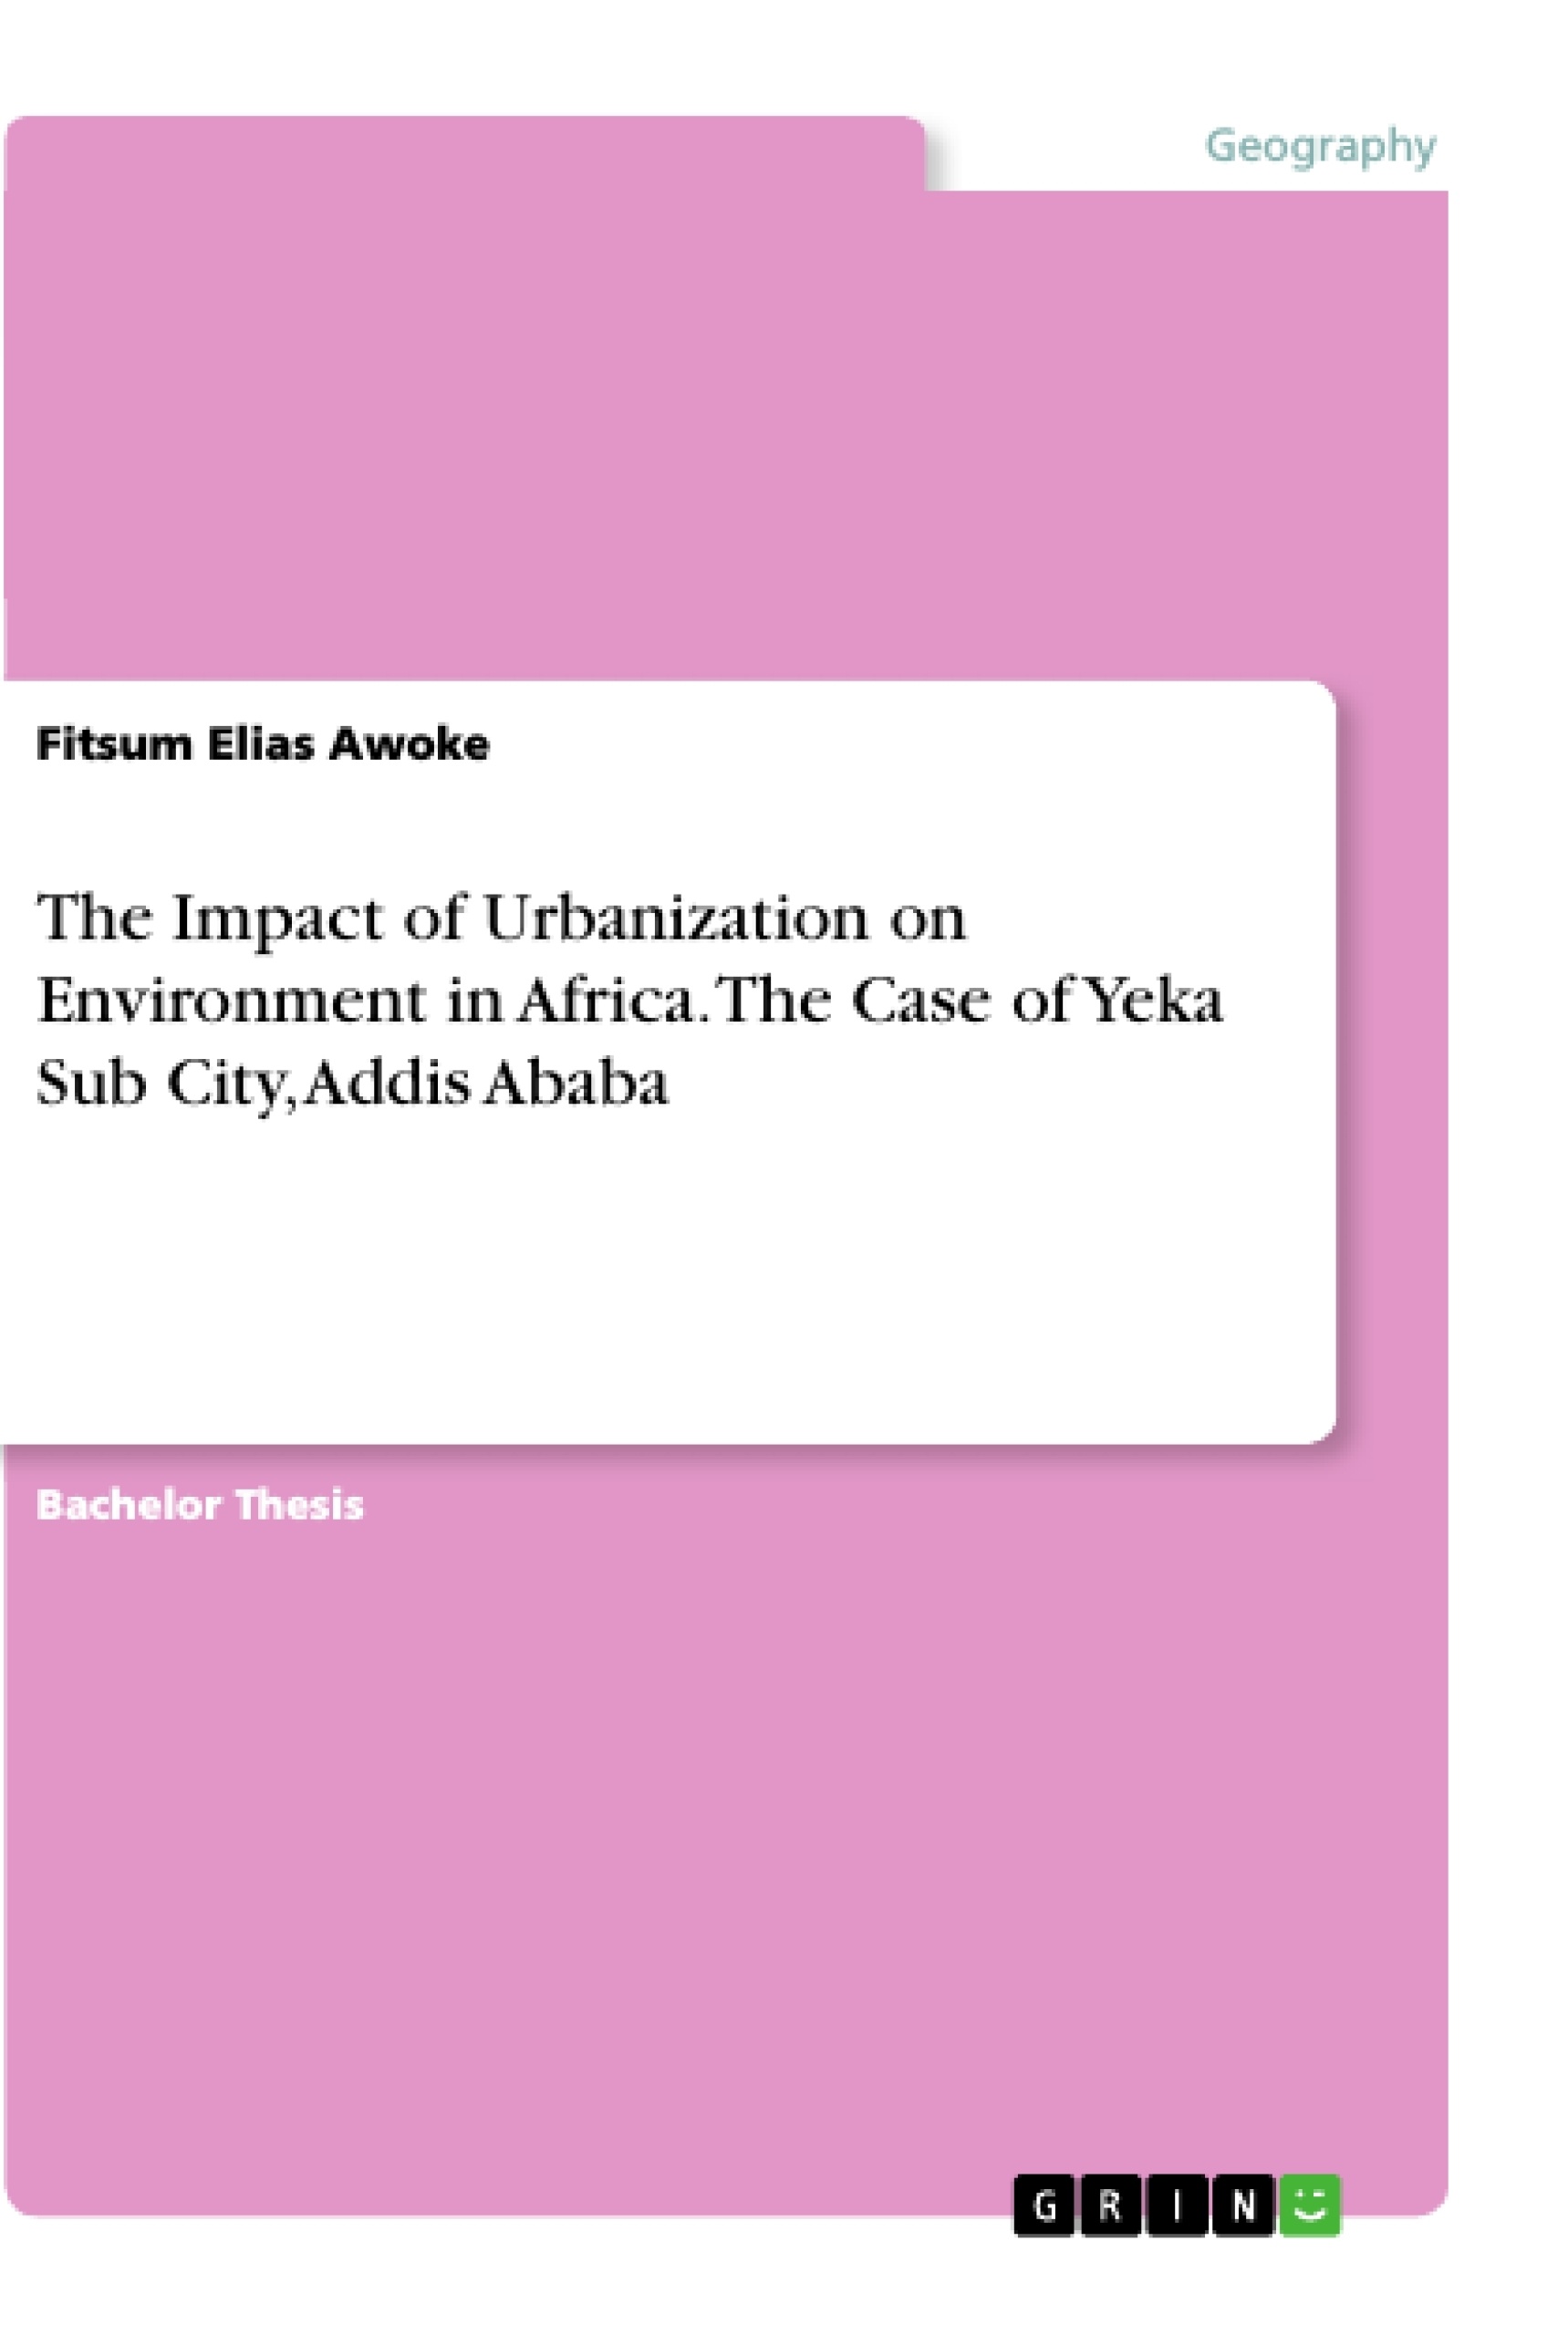 Titre: The Impact of Urbanization on Environment in Africa. The Case of Yeka Sub City, Addis Ababa